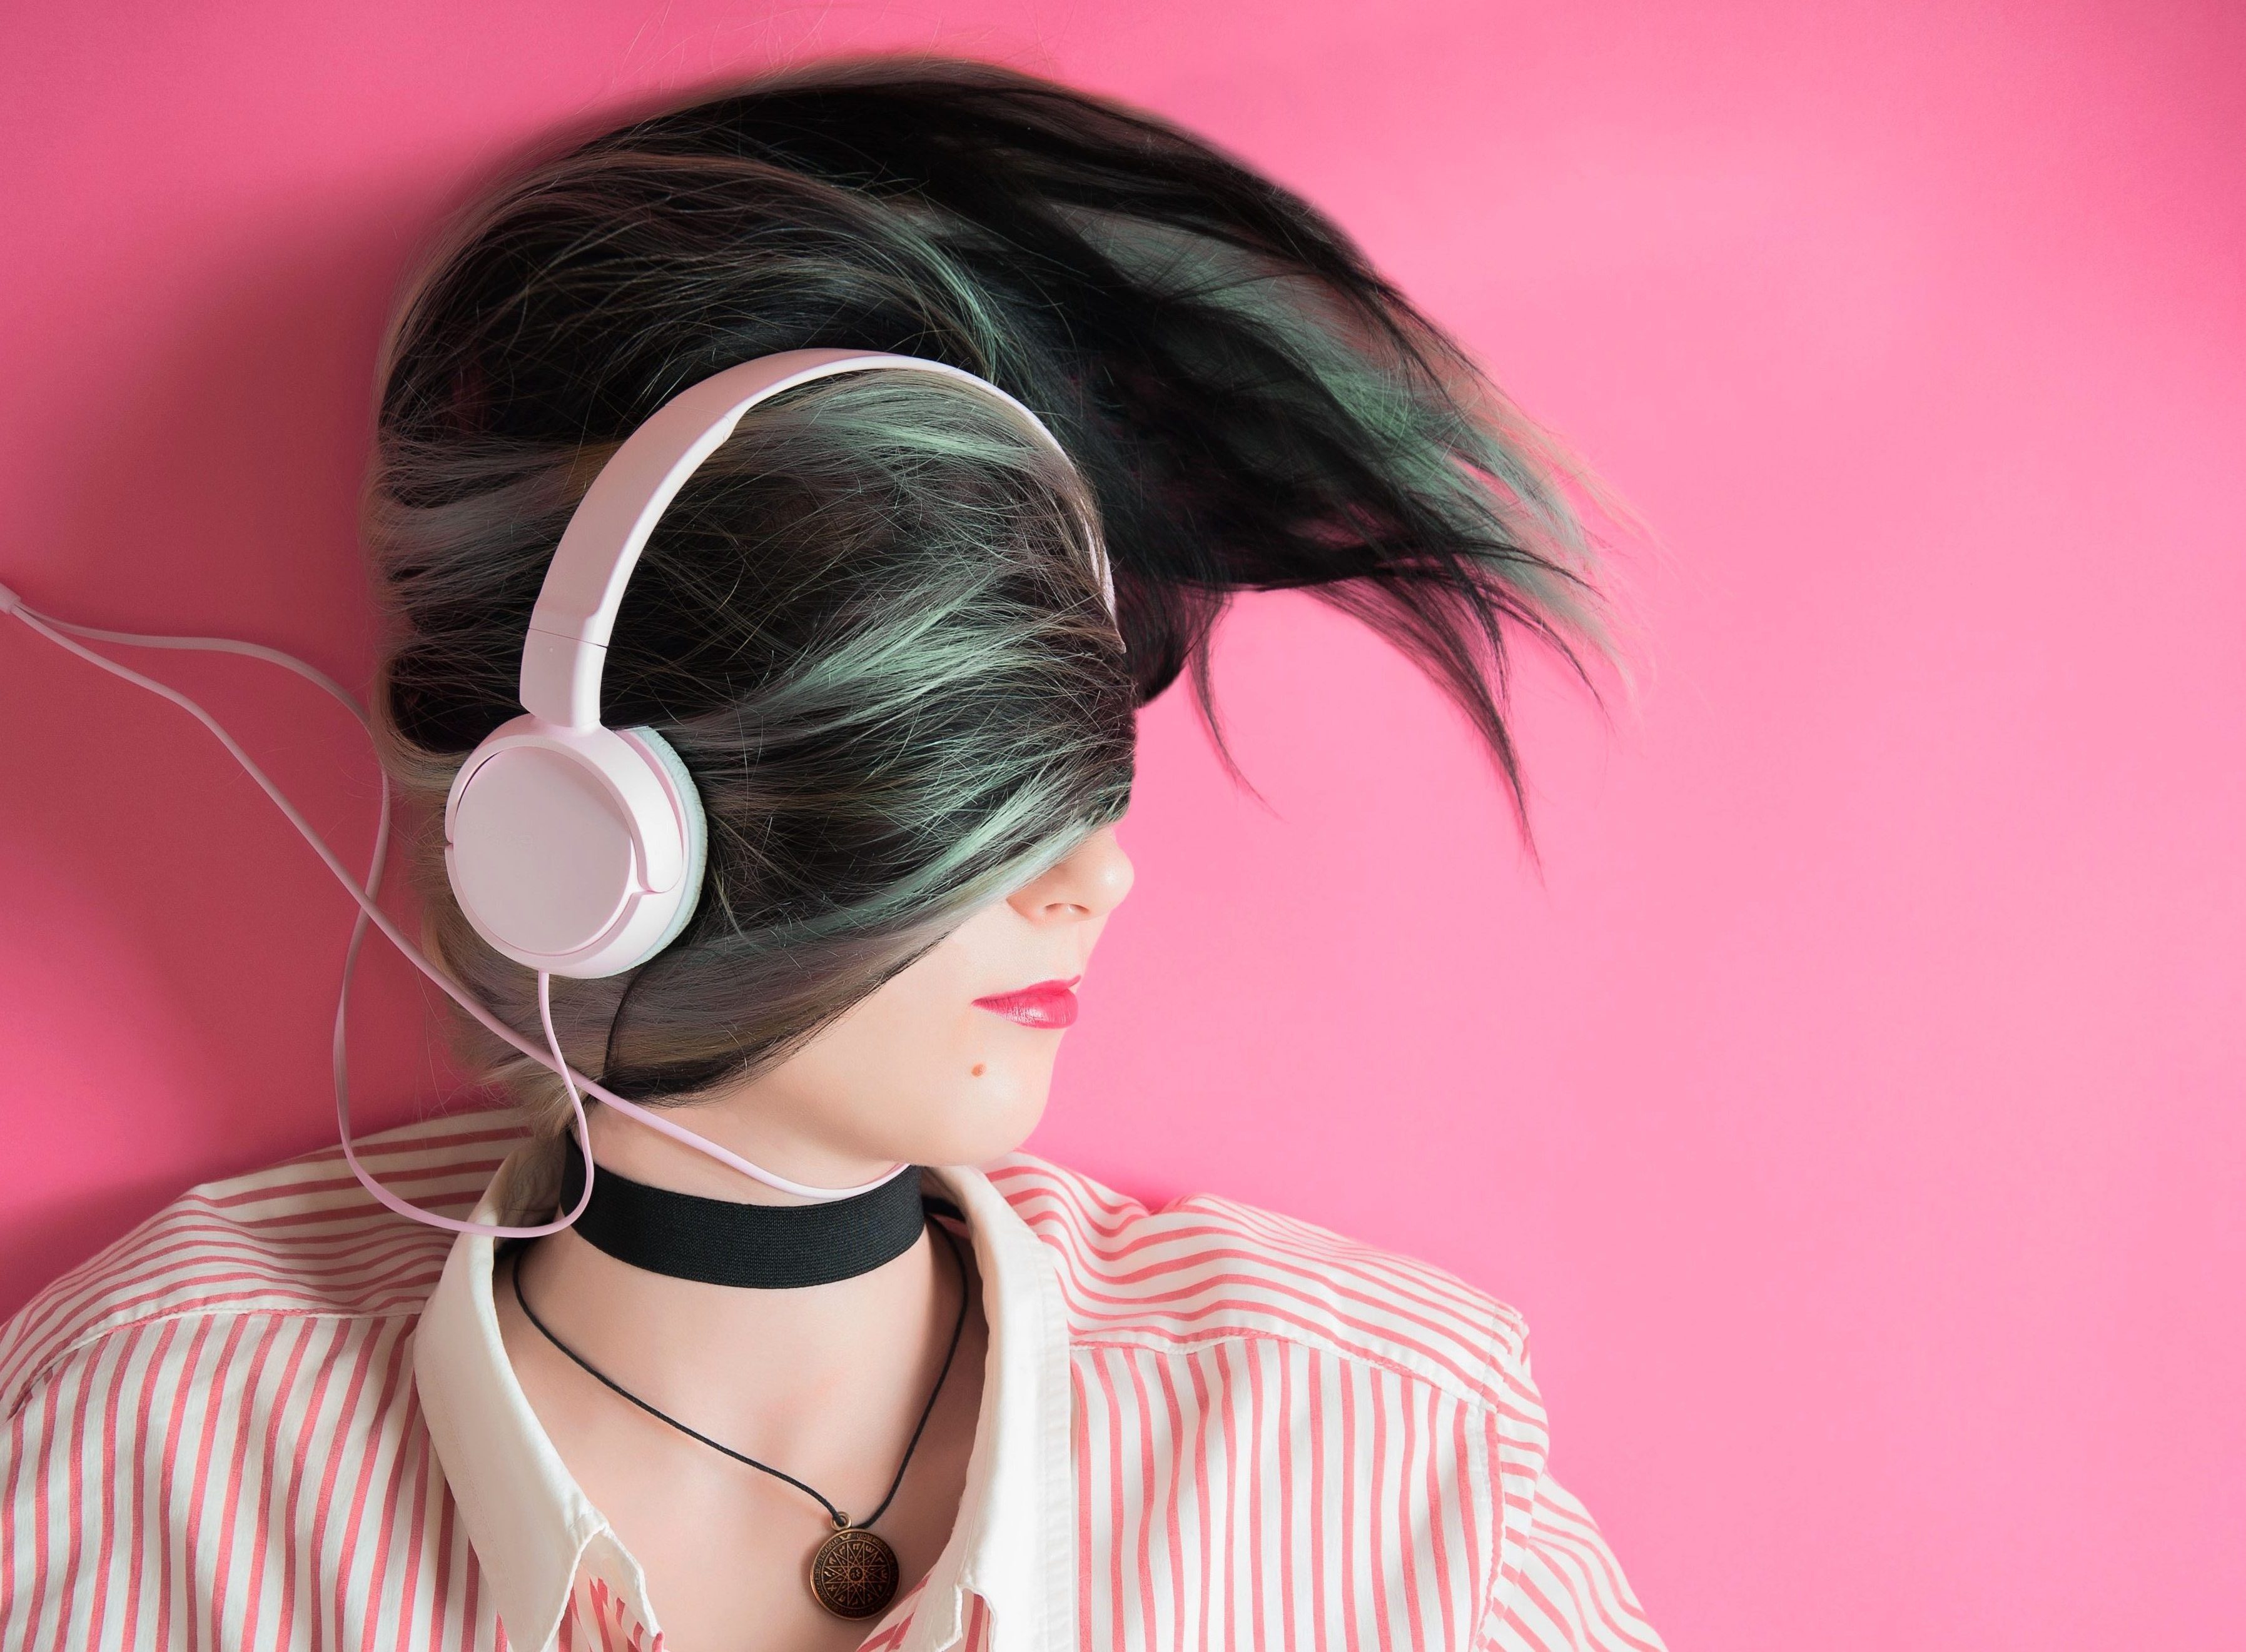 Free picture: woman, headphones, pink, portrait, music, hair